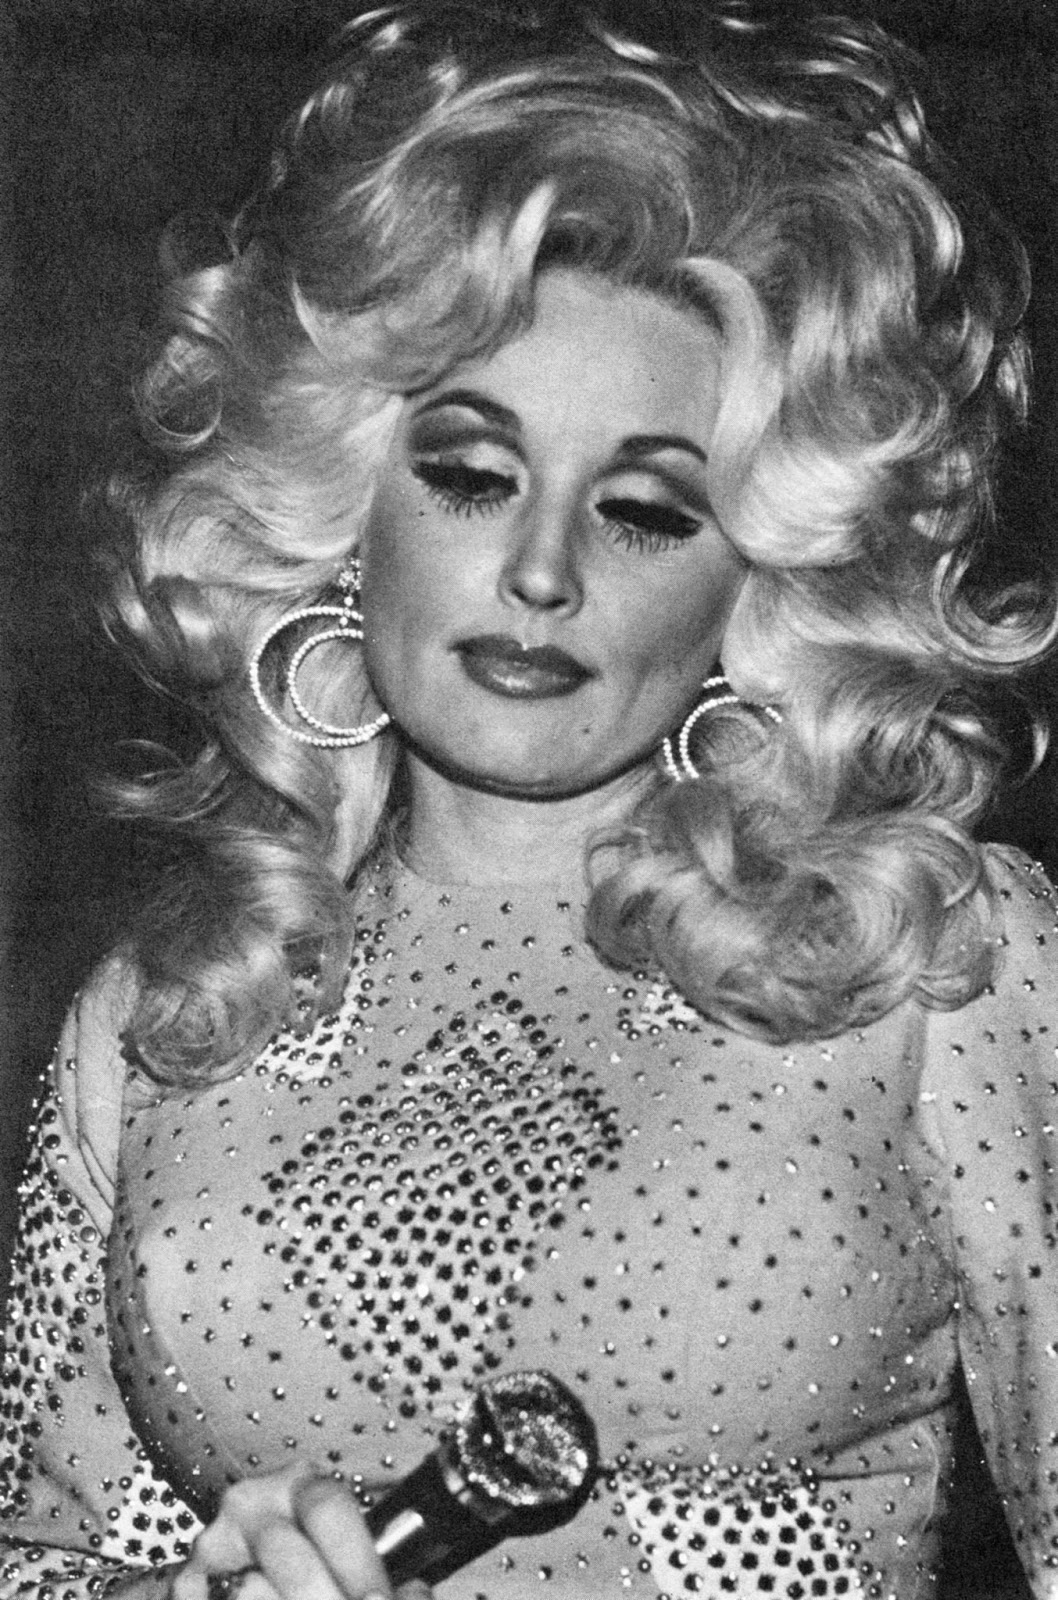 20 Beautiful Portrait Photos Of Dolly Parton In The 1970s ~ Vintage Everyday